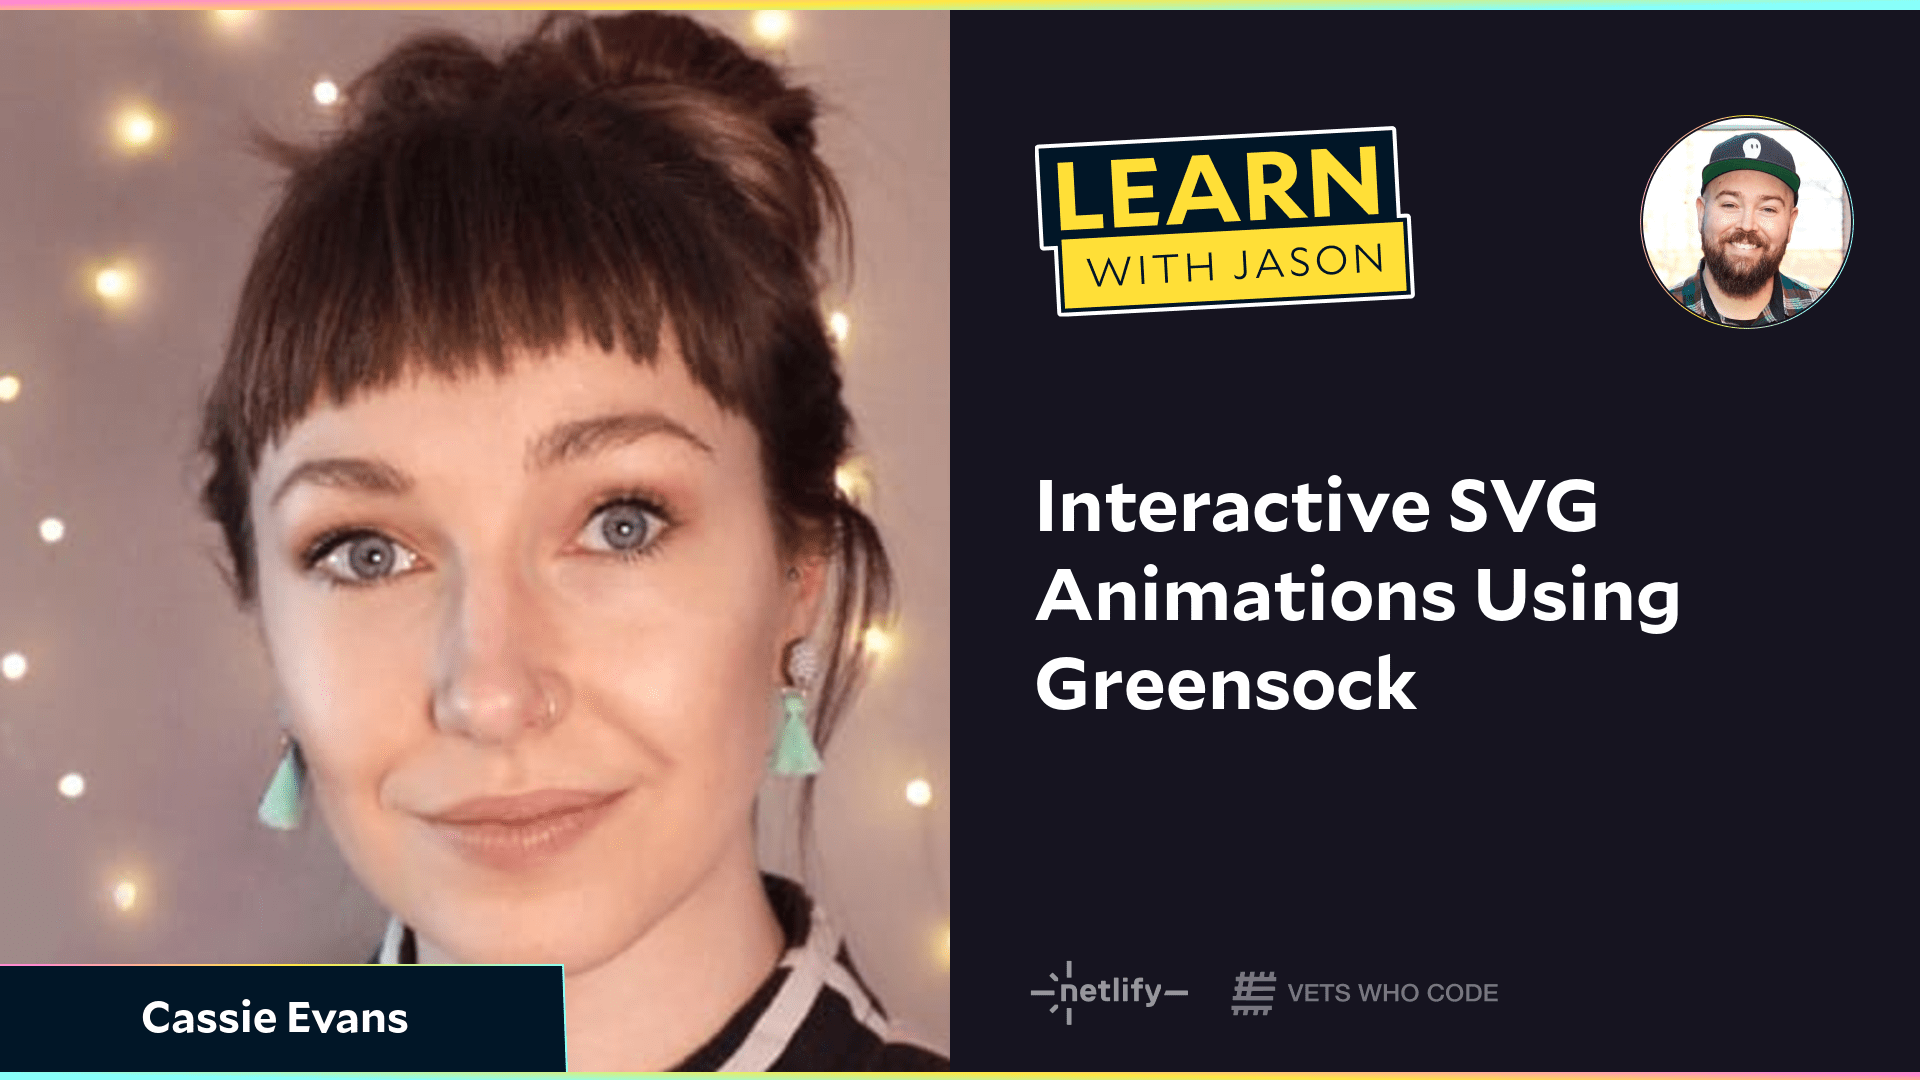 Interactive SVG Animations Using Greensock  (with Cassie Evans)